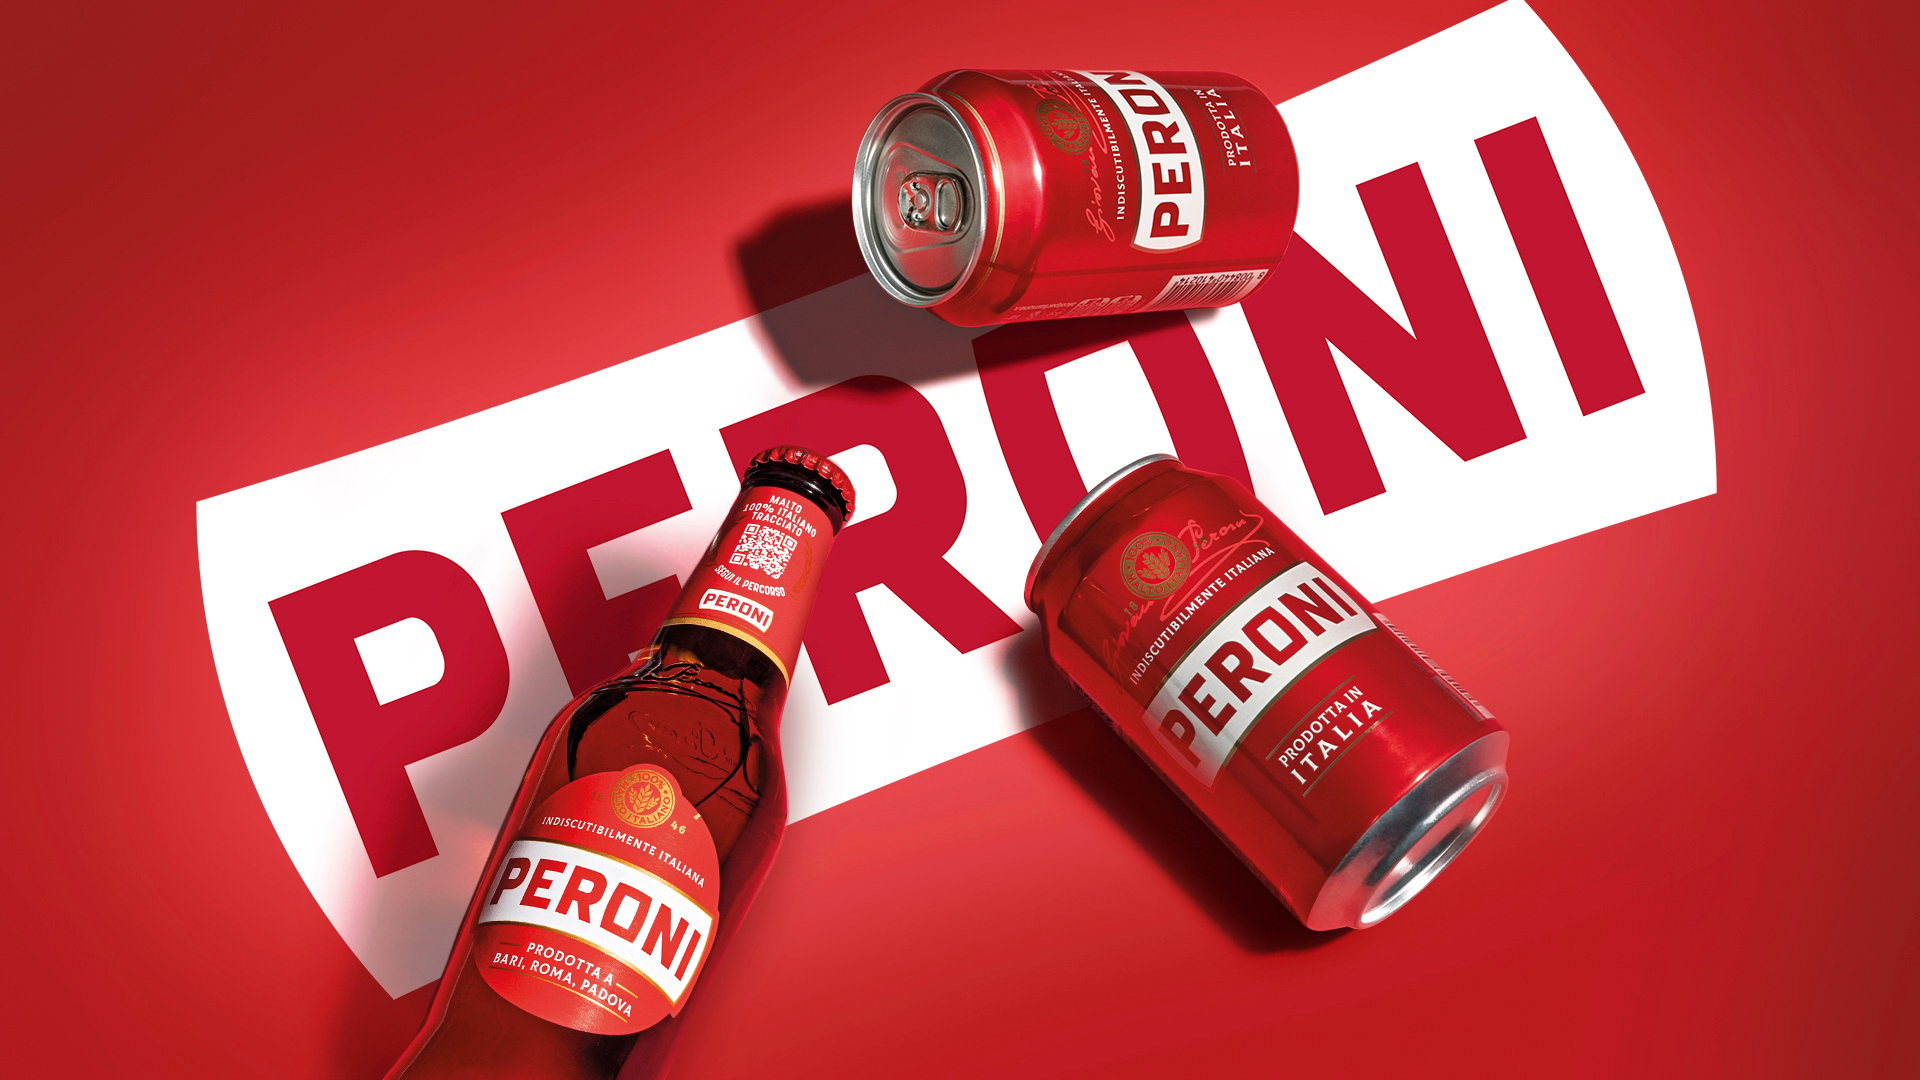 The Iconic Italian Beer Peroni Gets a Classy New Look from Smith Lumen